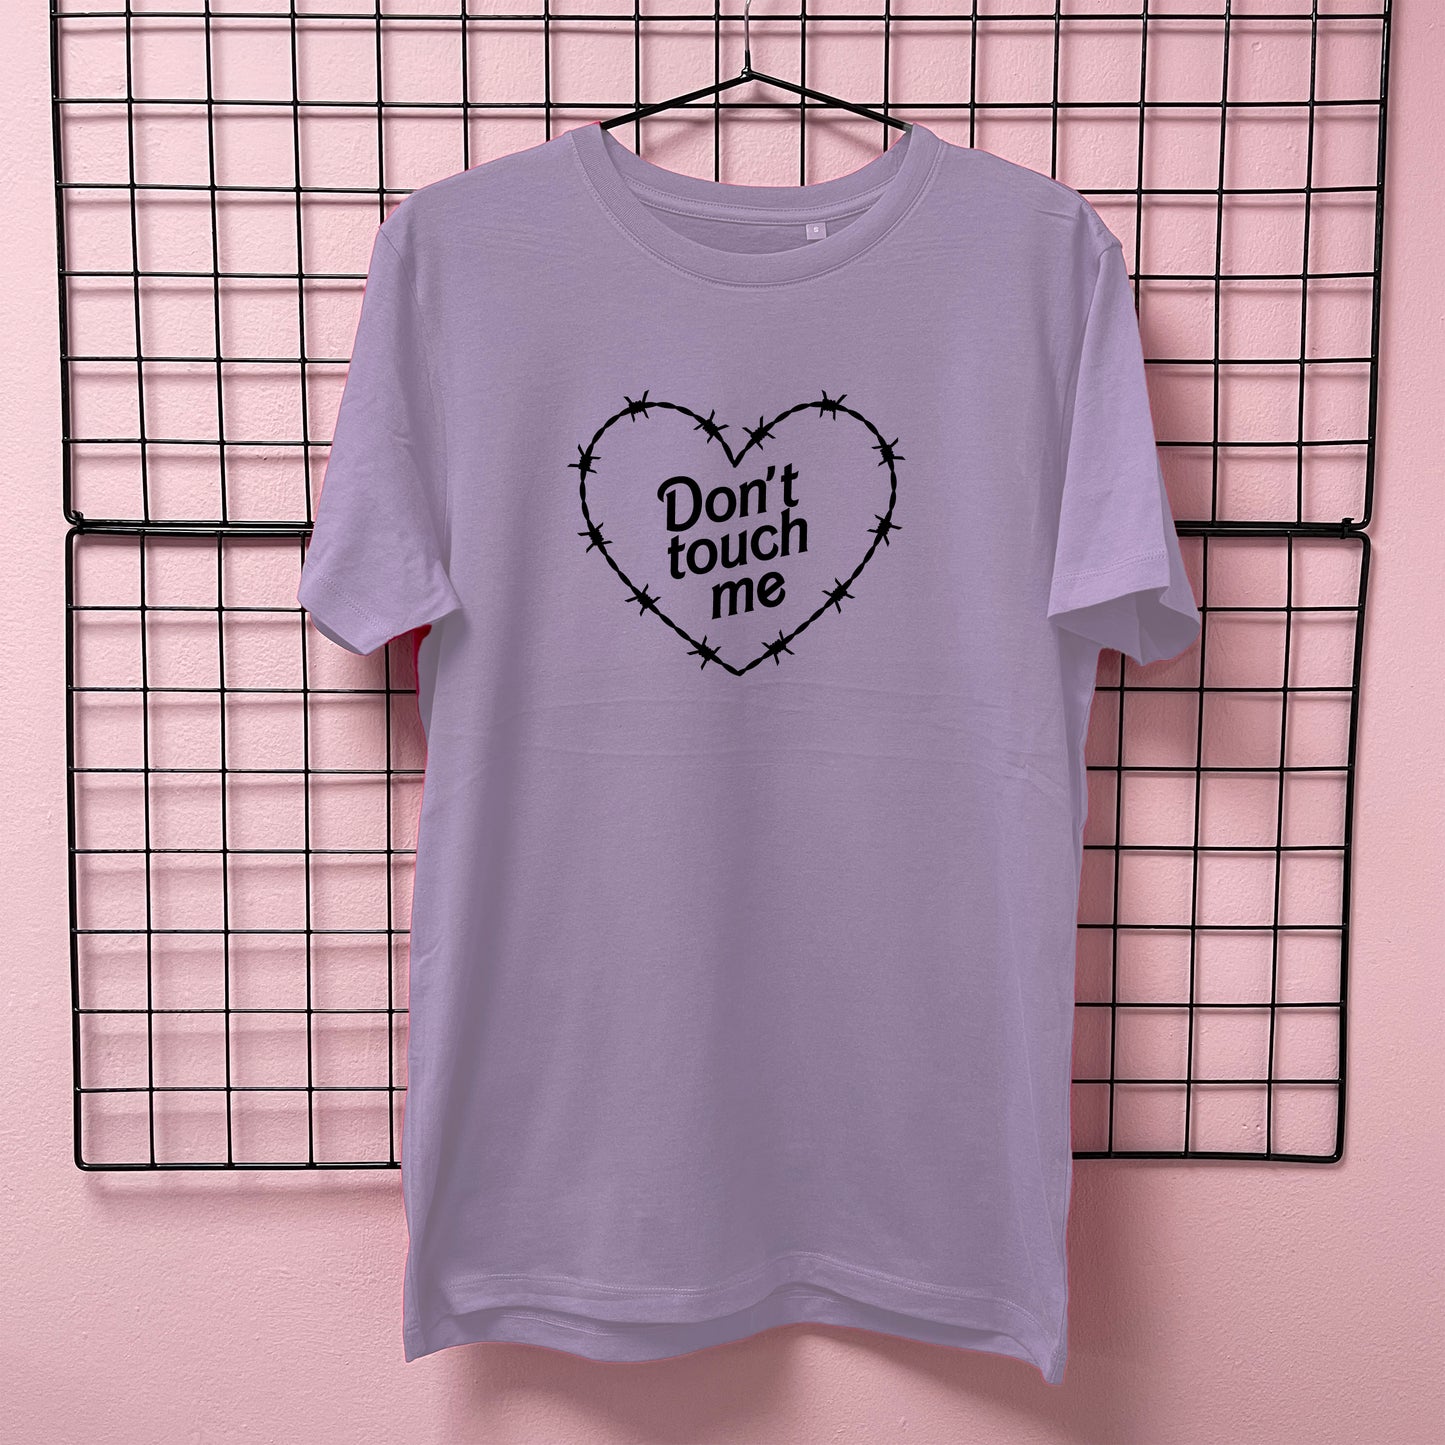 DON'T TOUCH ME HEART T-SHIRT